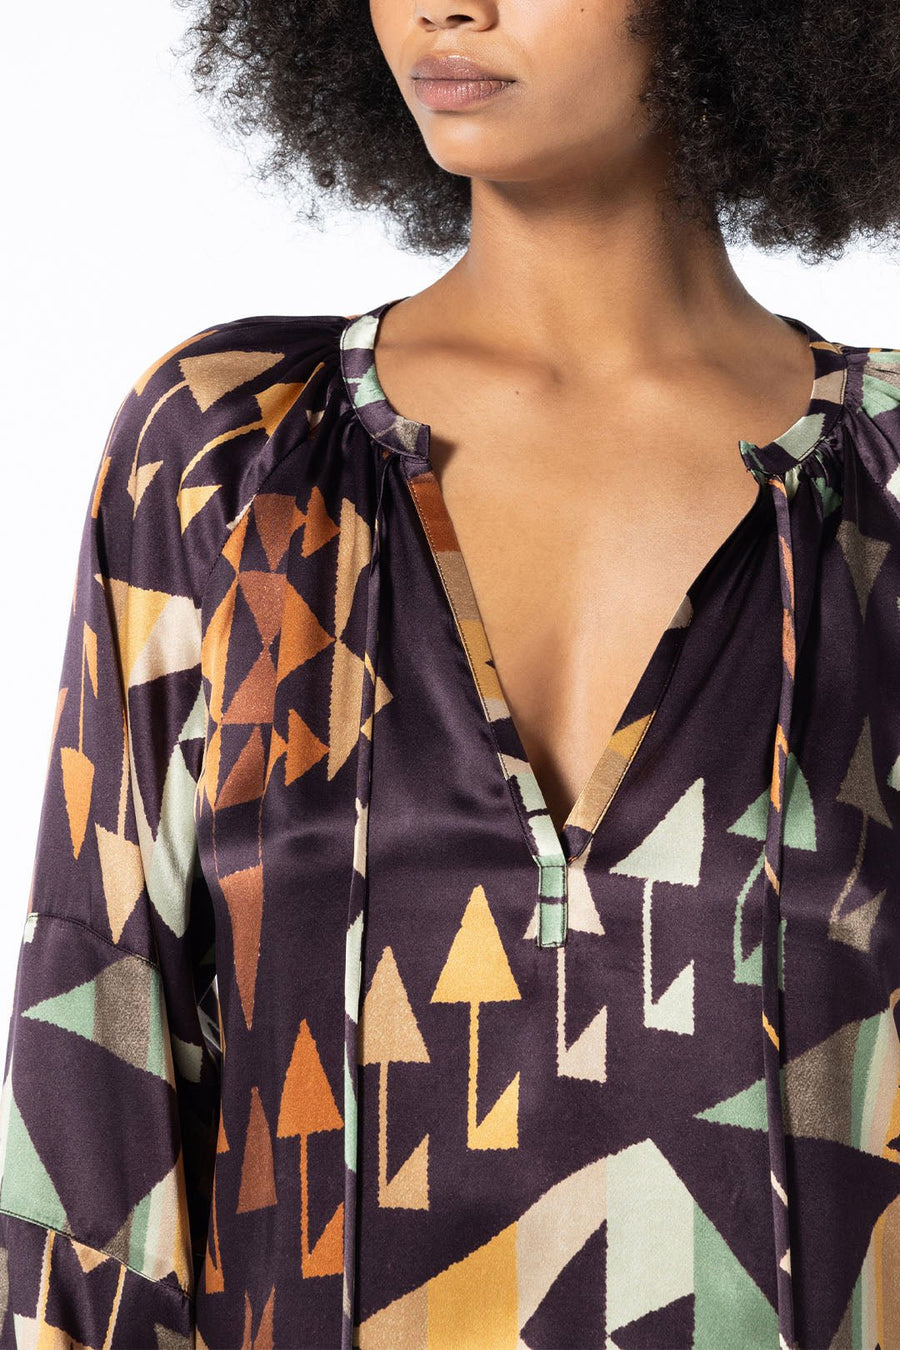 LABYRINTH LONG SLEEVE BLOUSE, MULTI - Burning Torch Online Boutique